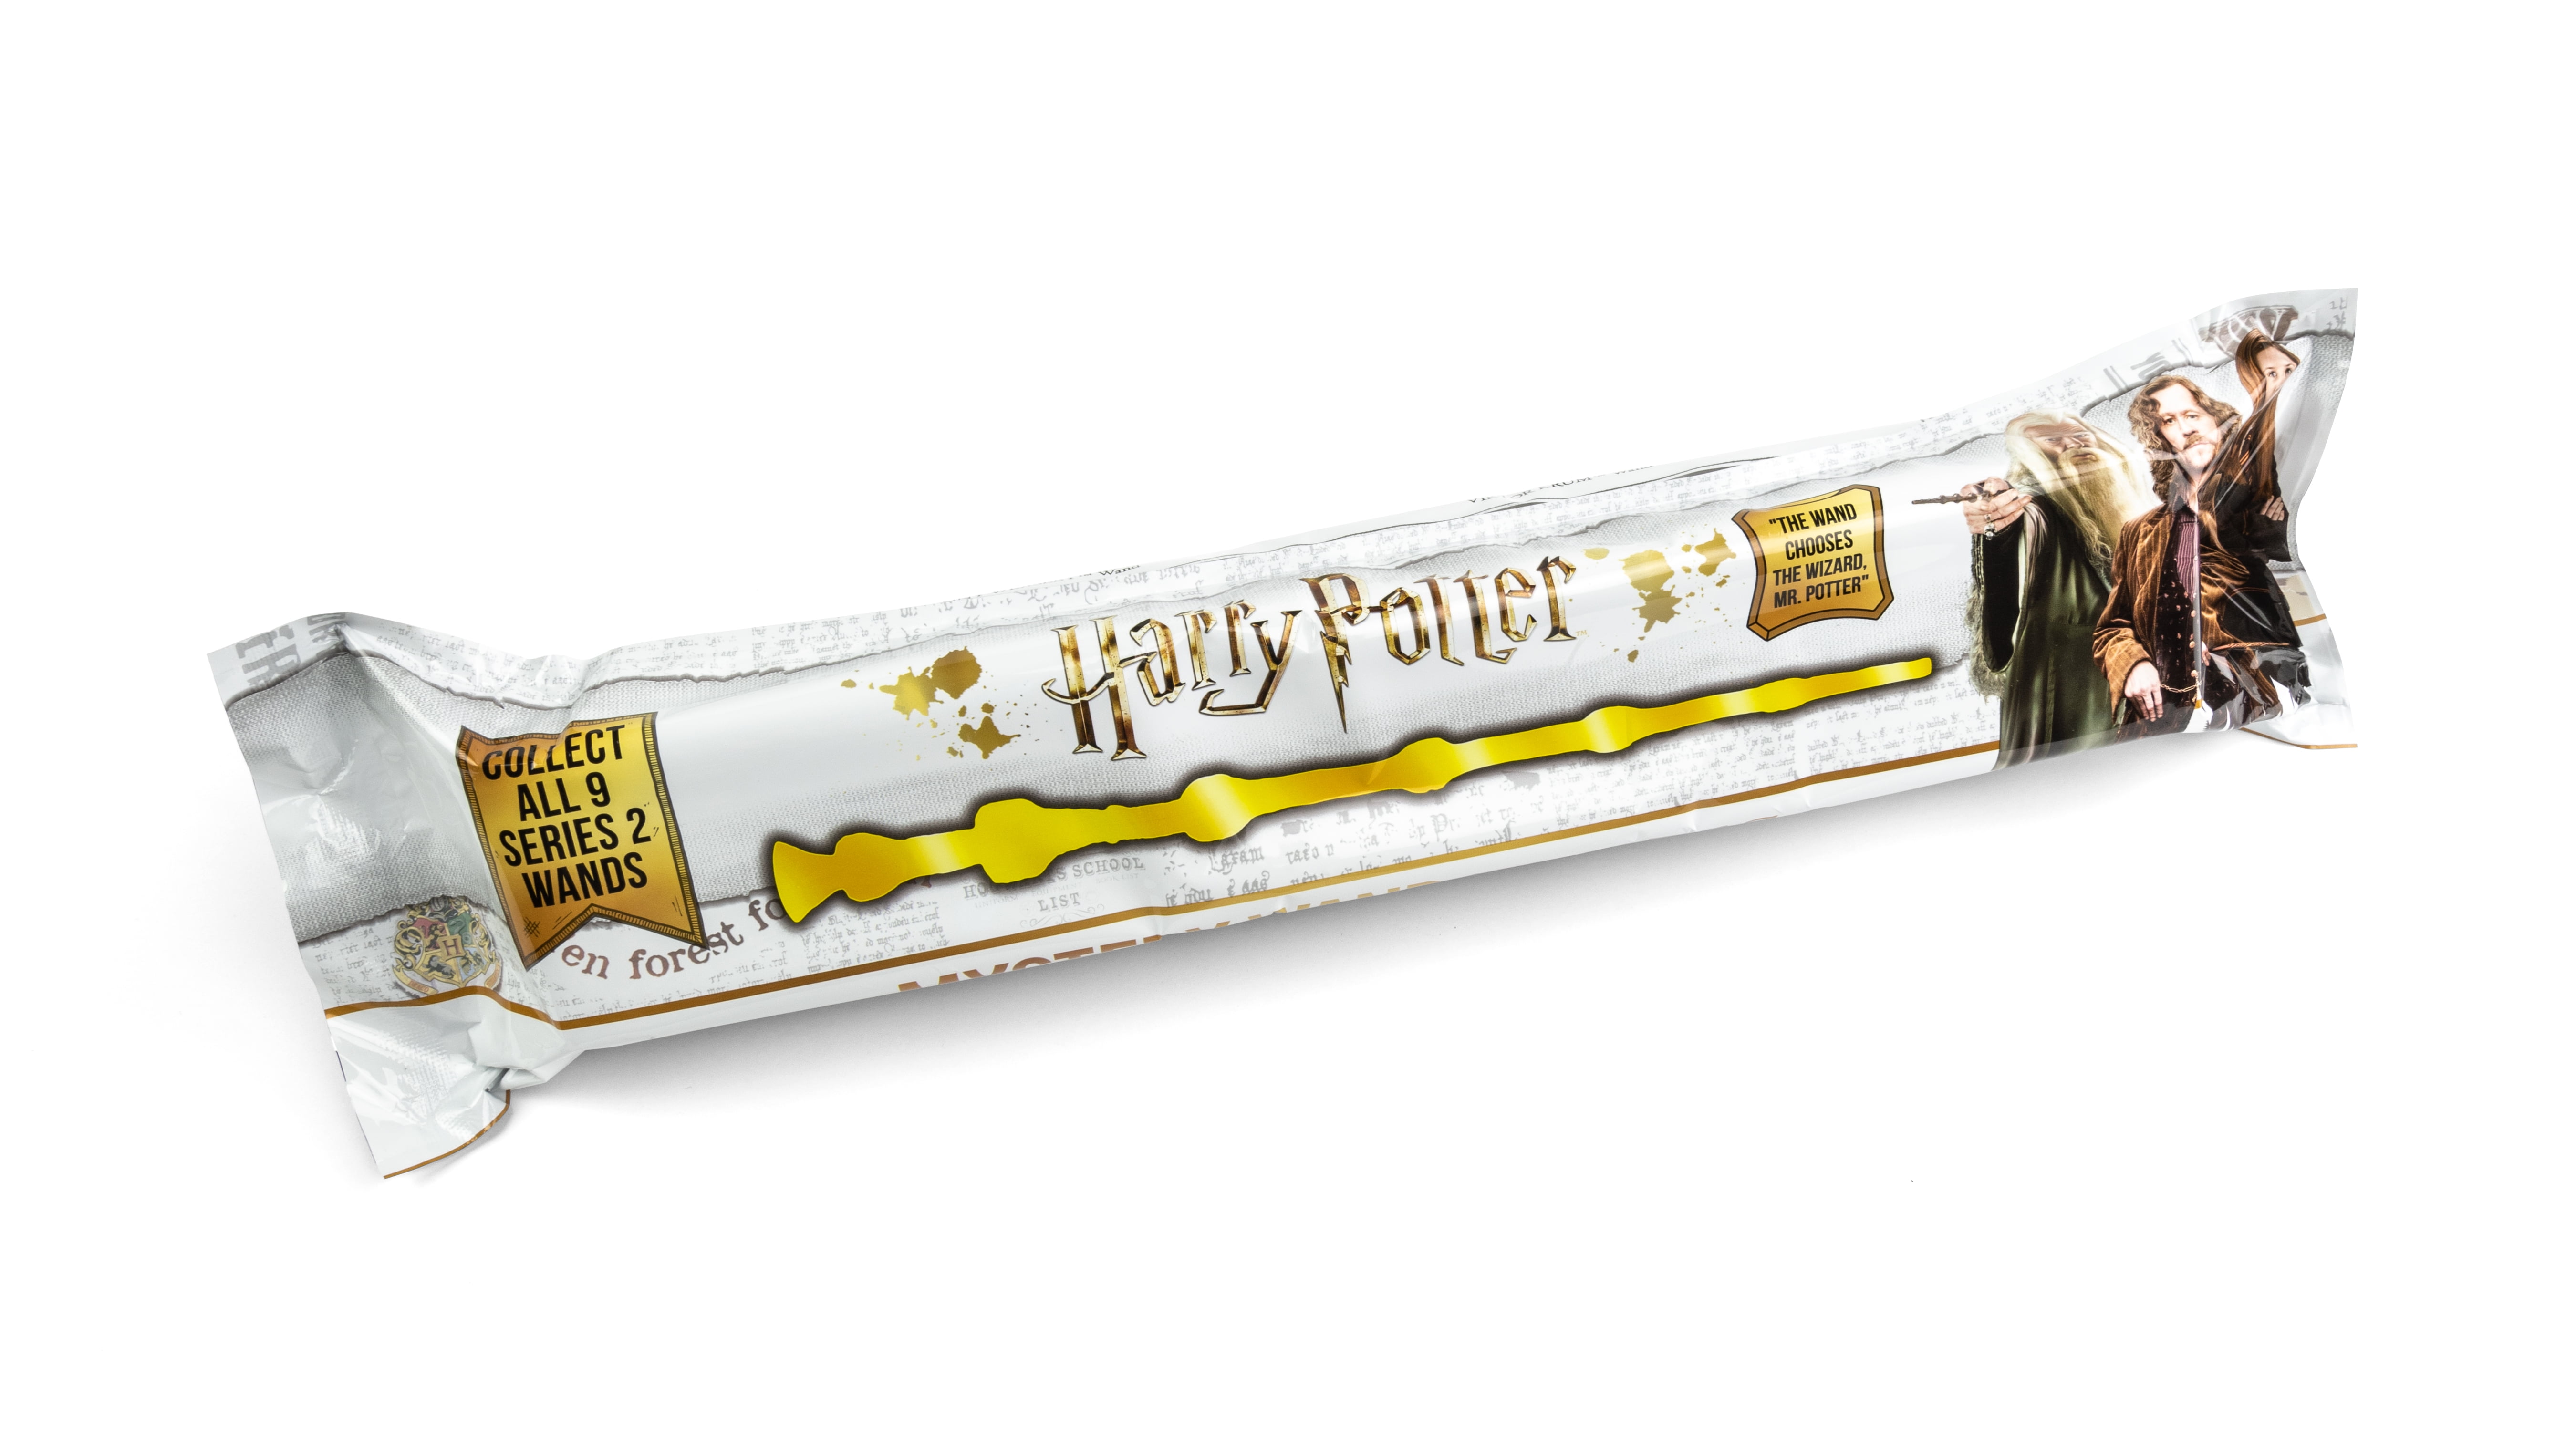 Magic wands wizard harry potter wand Dumbledore led bright magic high quality with unisex magic gift box packaging